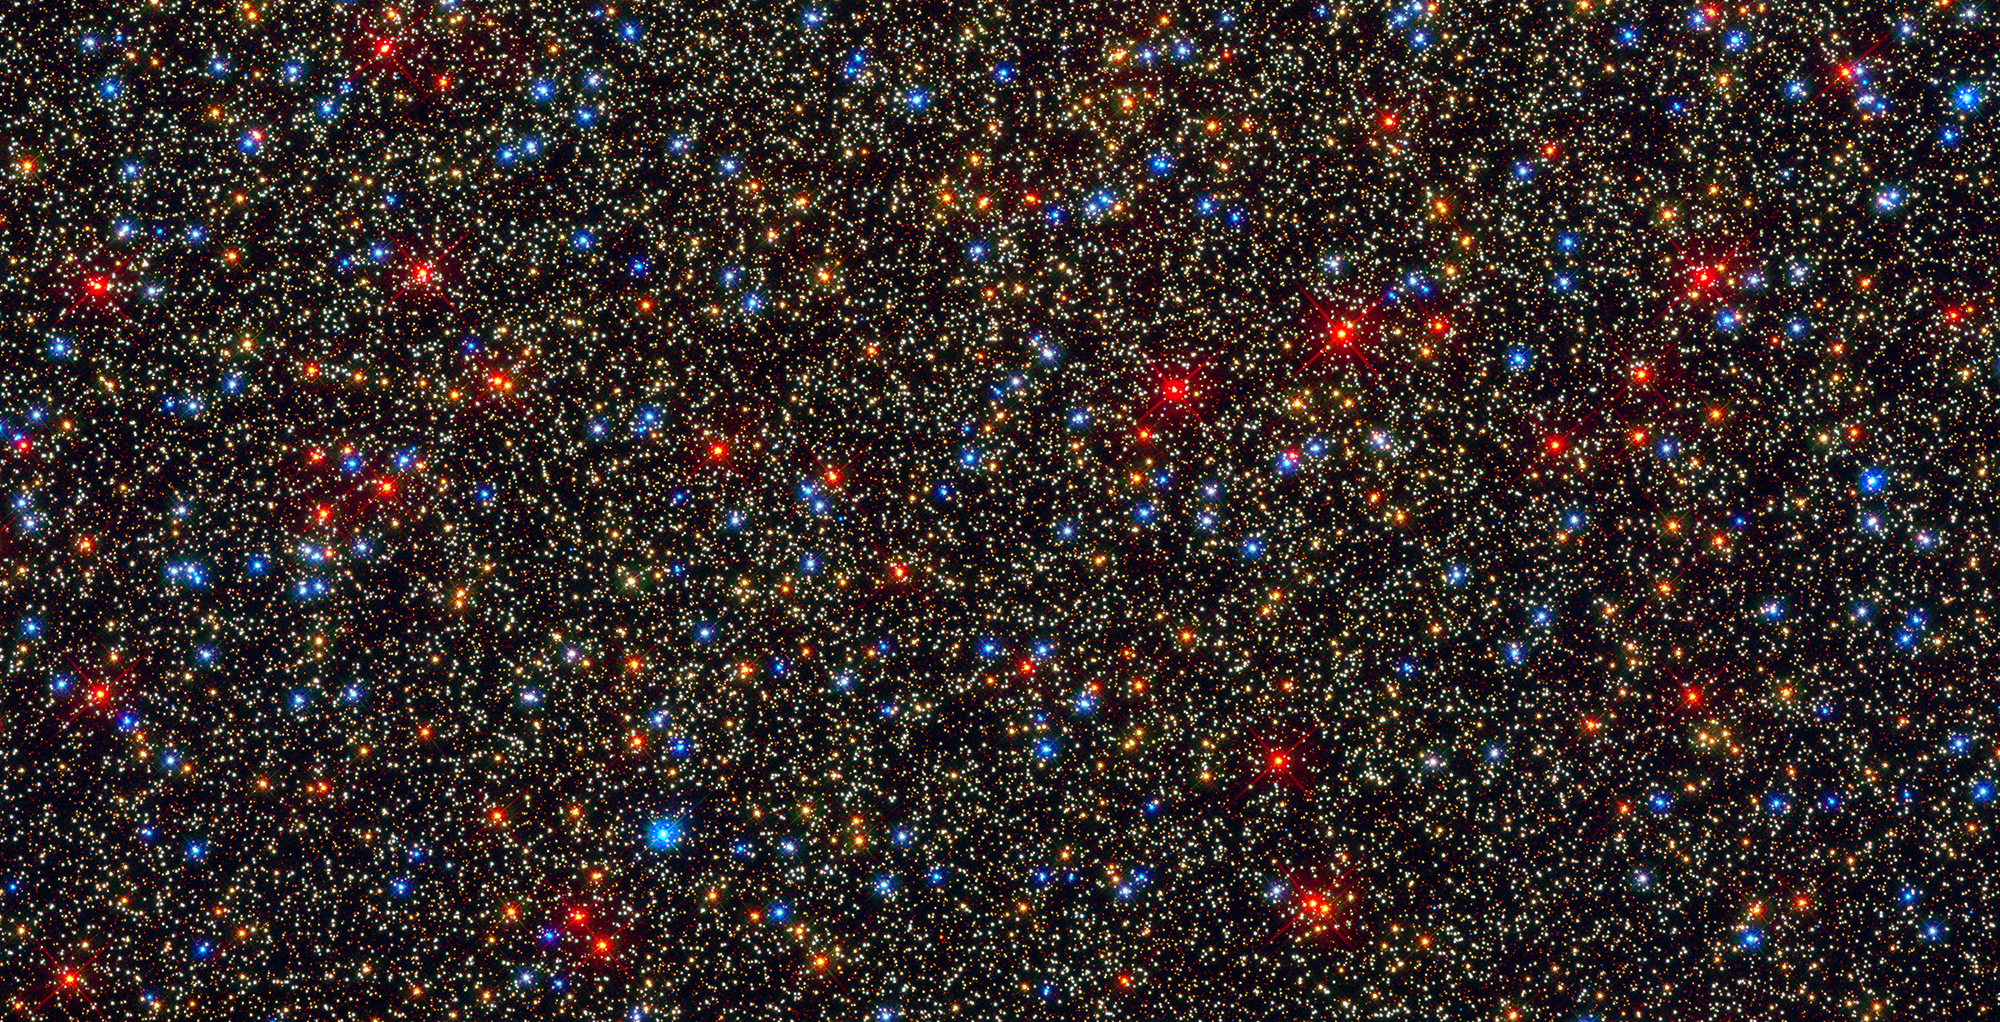 The Omega Centauri globular star cluster. The sharp vision of the Hubble Space Telescope can distinguish brilliant star from star even in very crowded regions like this, revealing that stars are very diverse in size, mass, colour, age, and composition. Image Credit: NASA/ESA